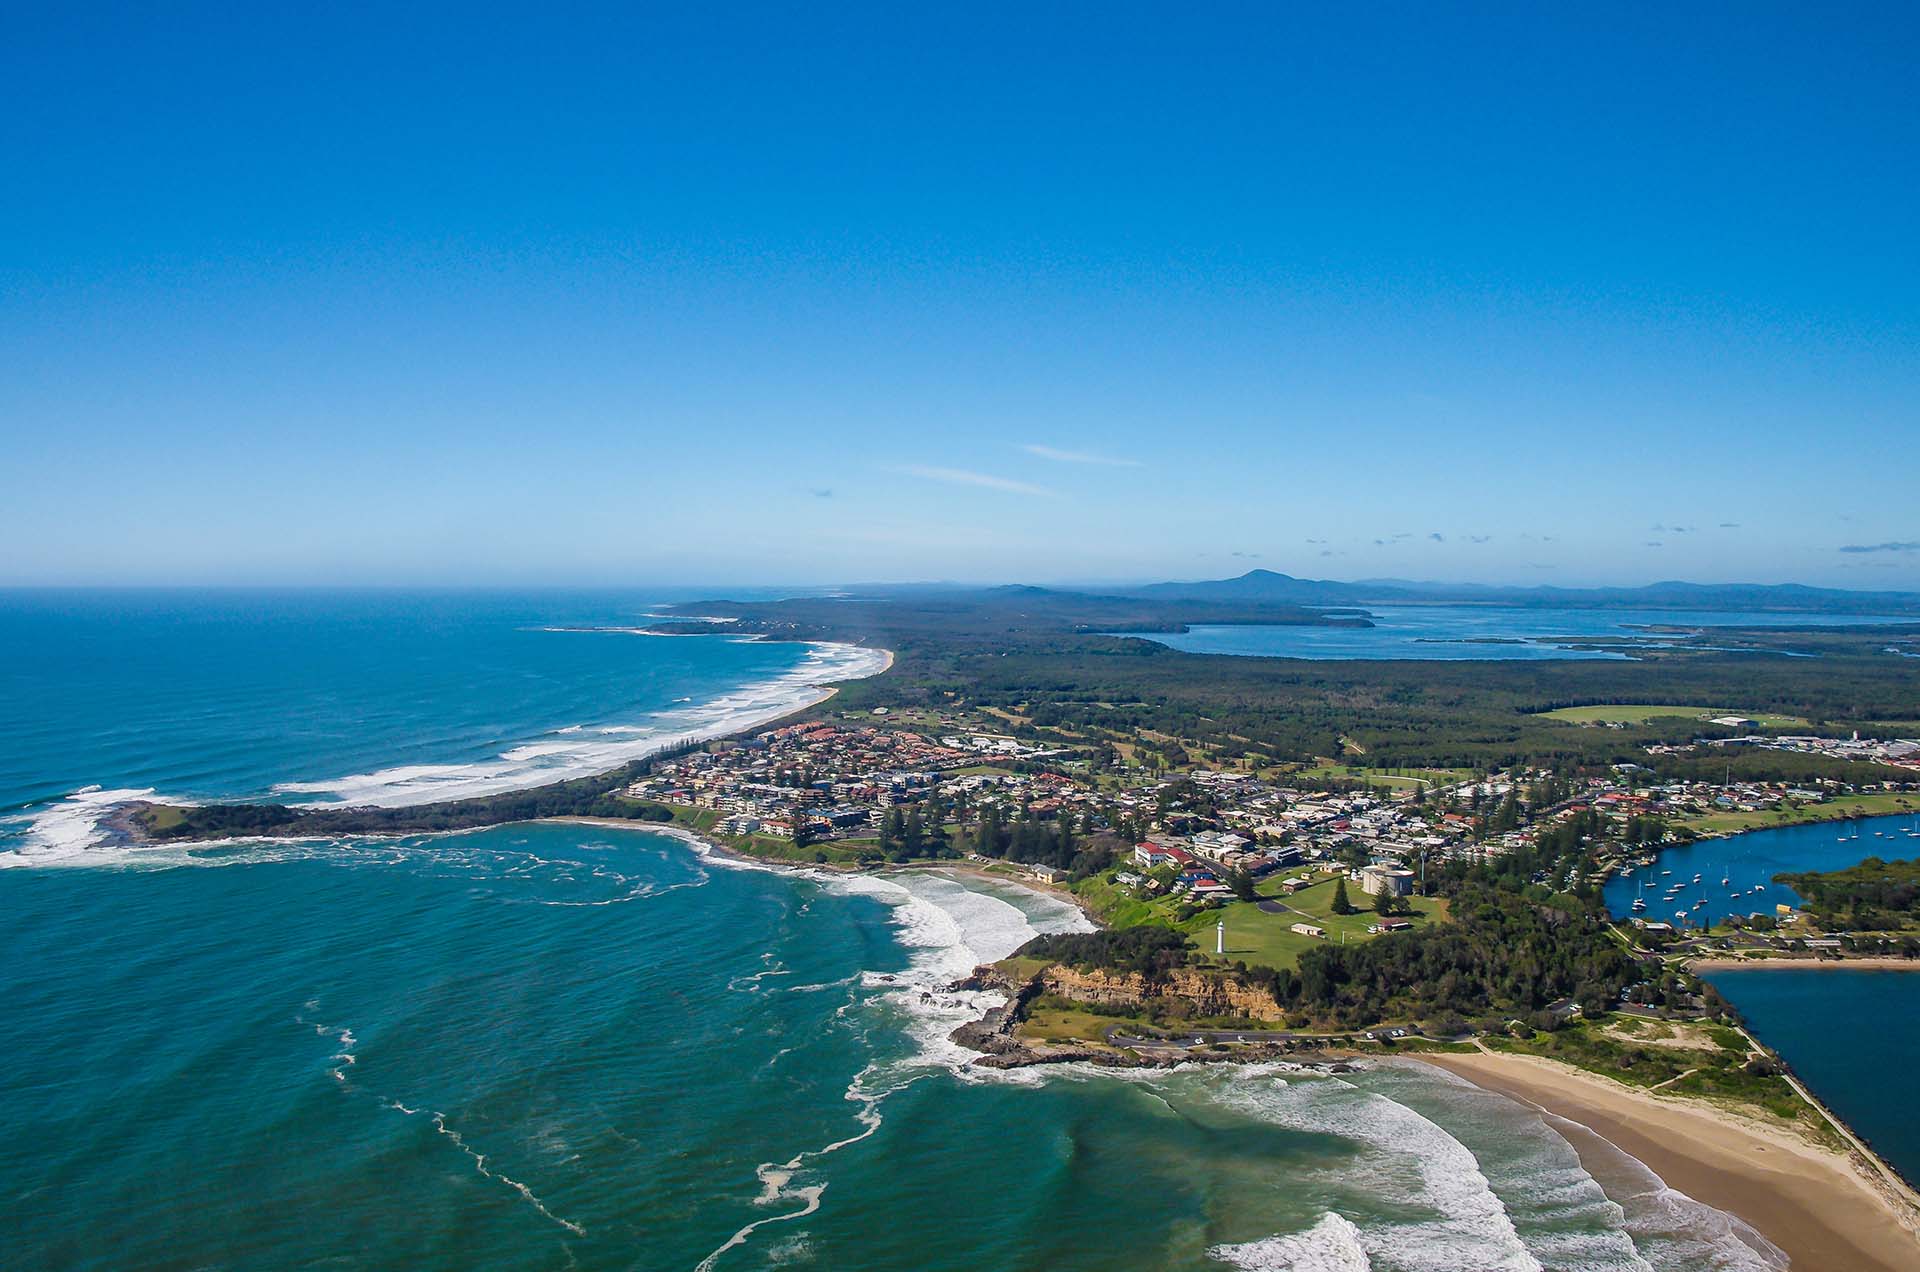 37 Uniquely Different Things To Do In Yamba (To Avoid The Crowds)